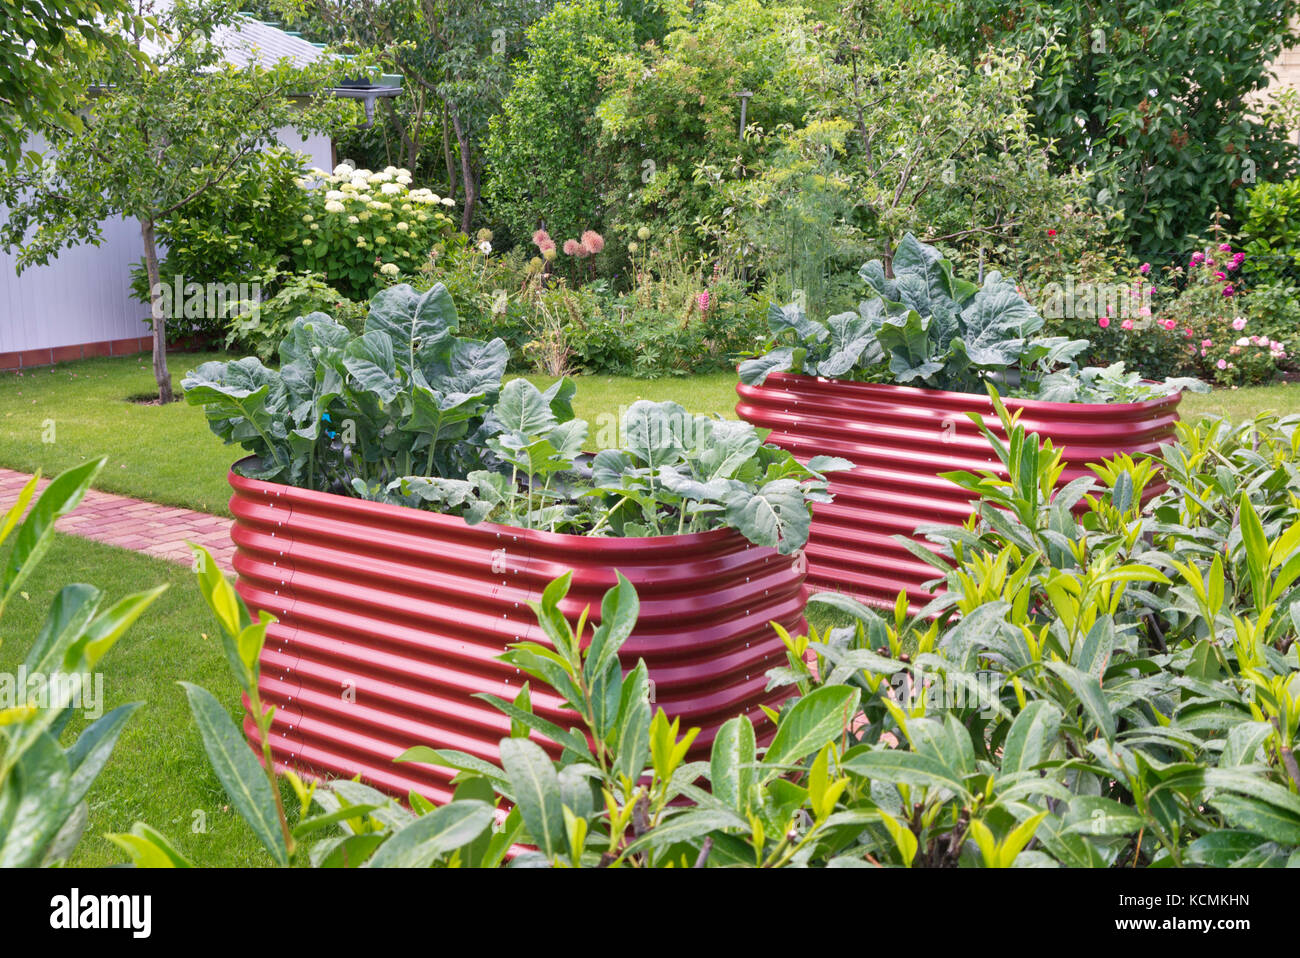 Raised bed made of corrugated metal sheet Stock Photo